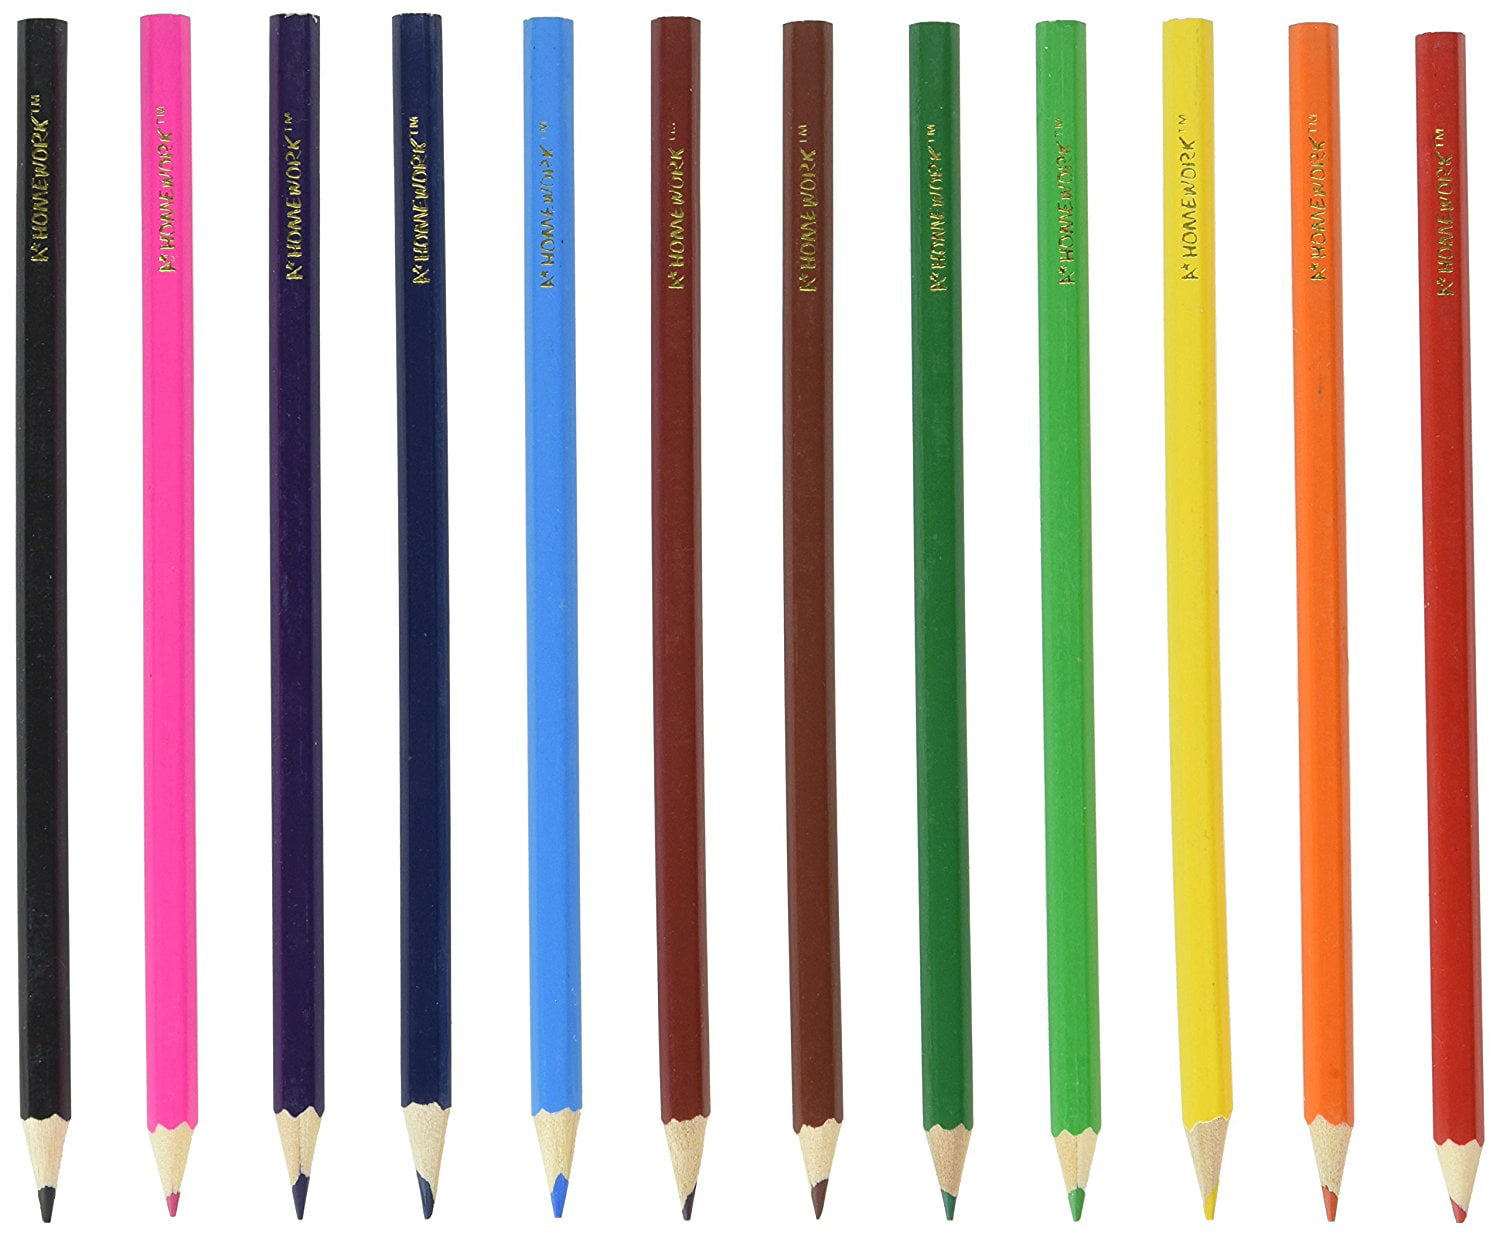 A+ Homework Colored Pencils, Assorted Colors, 12 Pack (UC1712), Colored